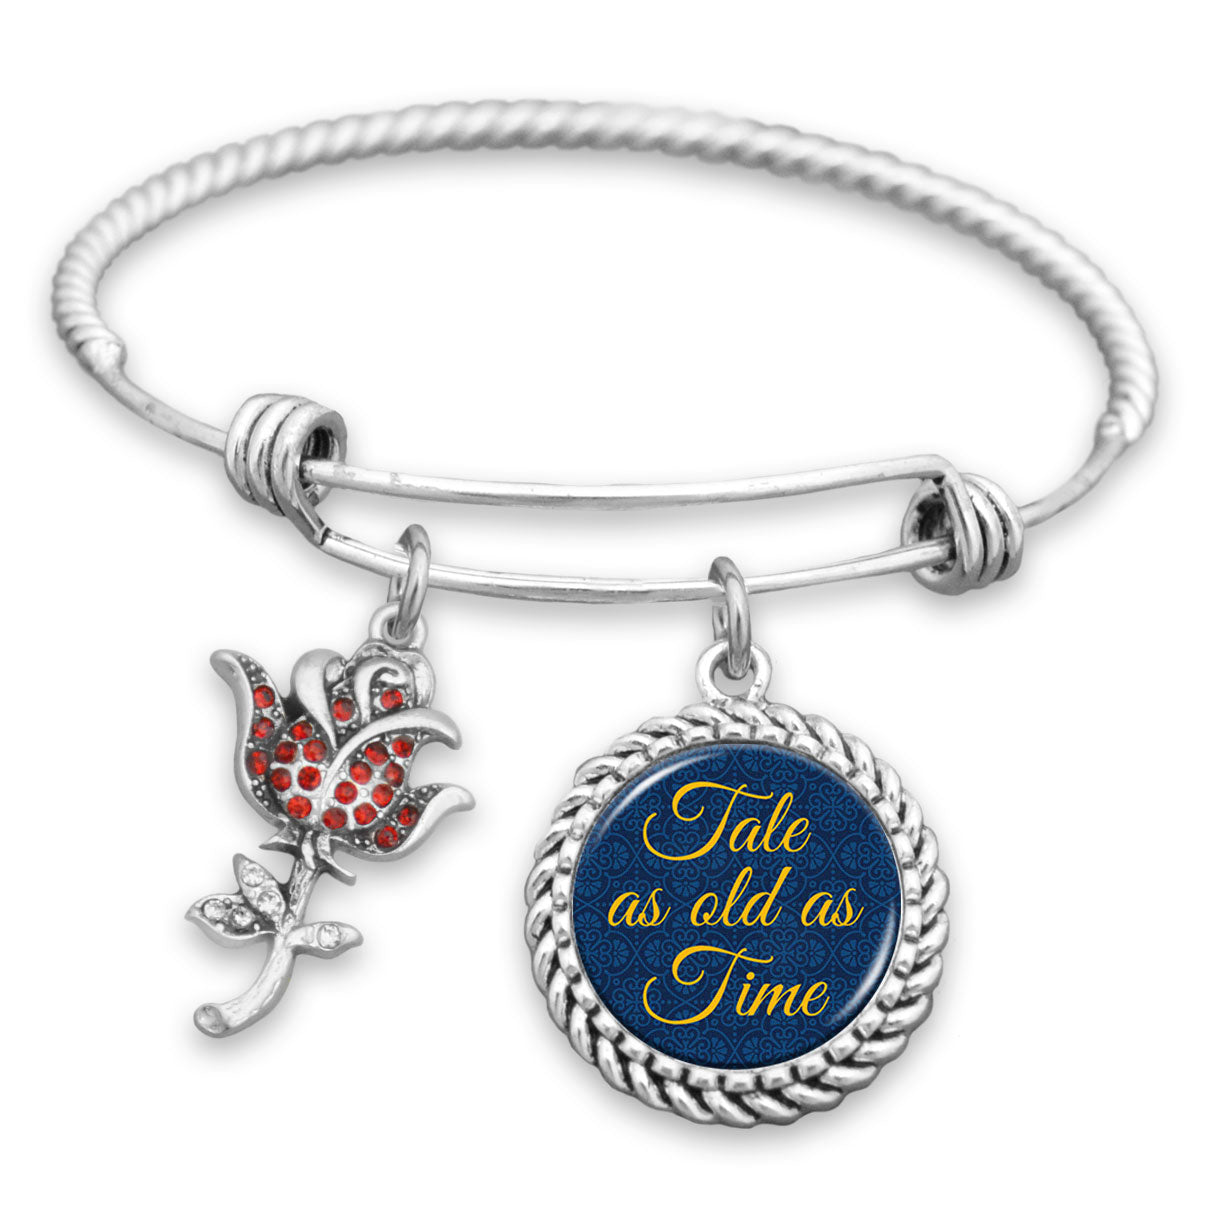 Tale As Old As Time - Rose Charm Bracelet